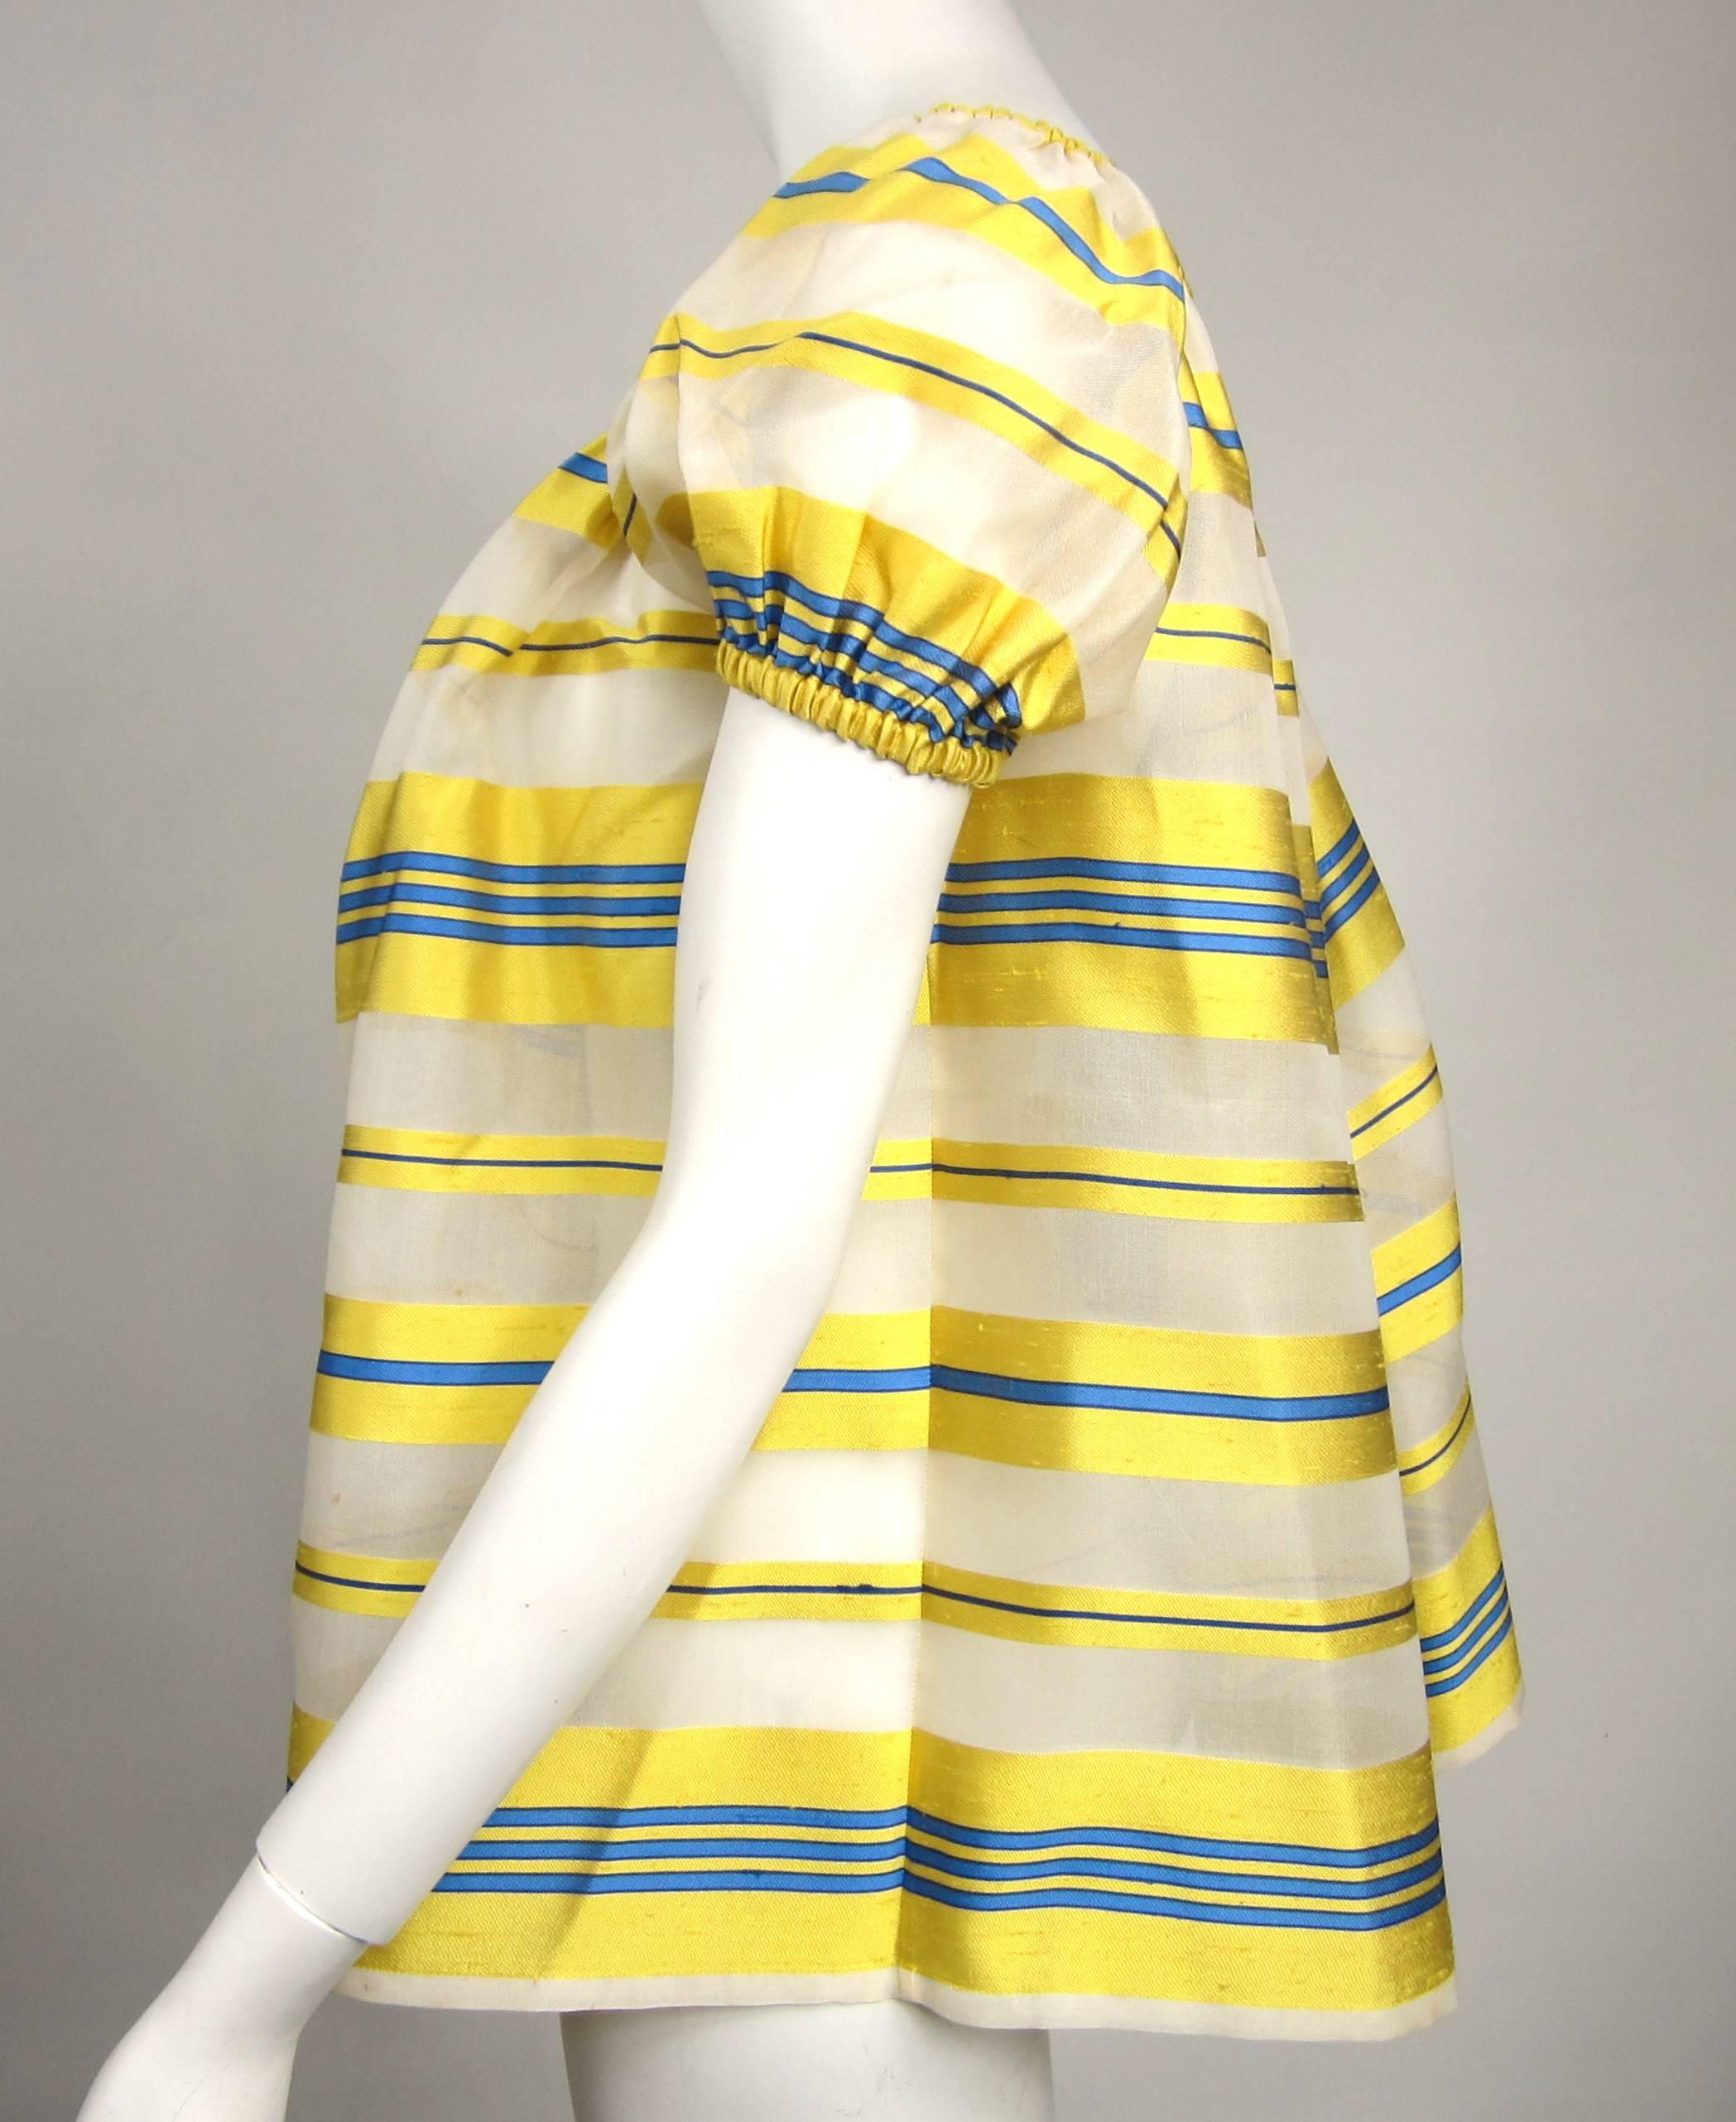 Yves Saint Laurent Silk Dupioni Over Sized Yellow Striped Blouse 1990s In Good Condition In Wallkill, NY